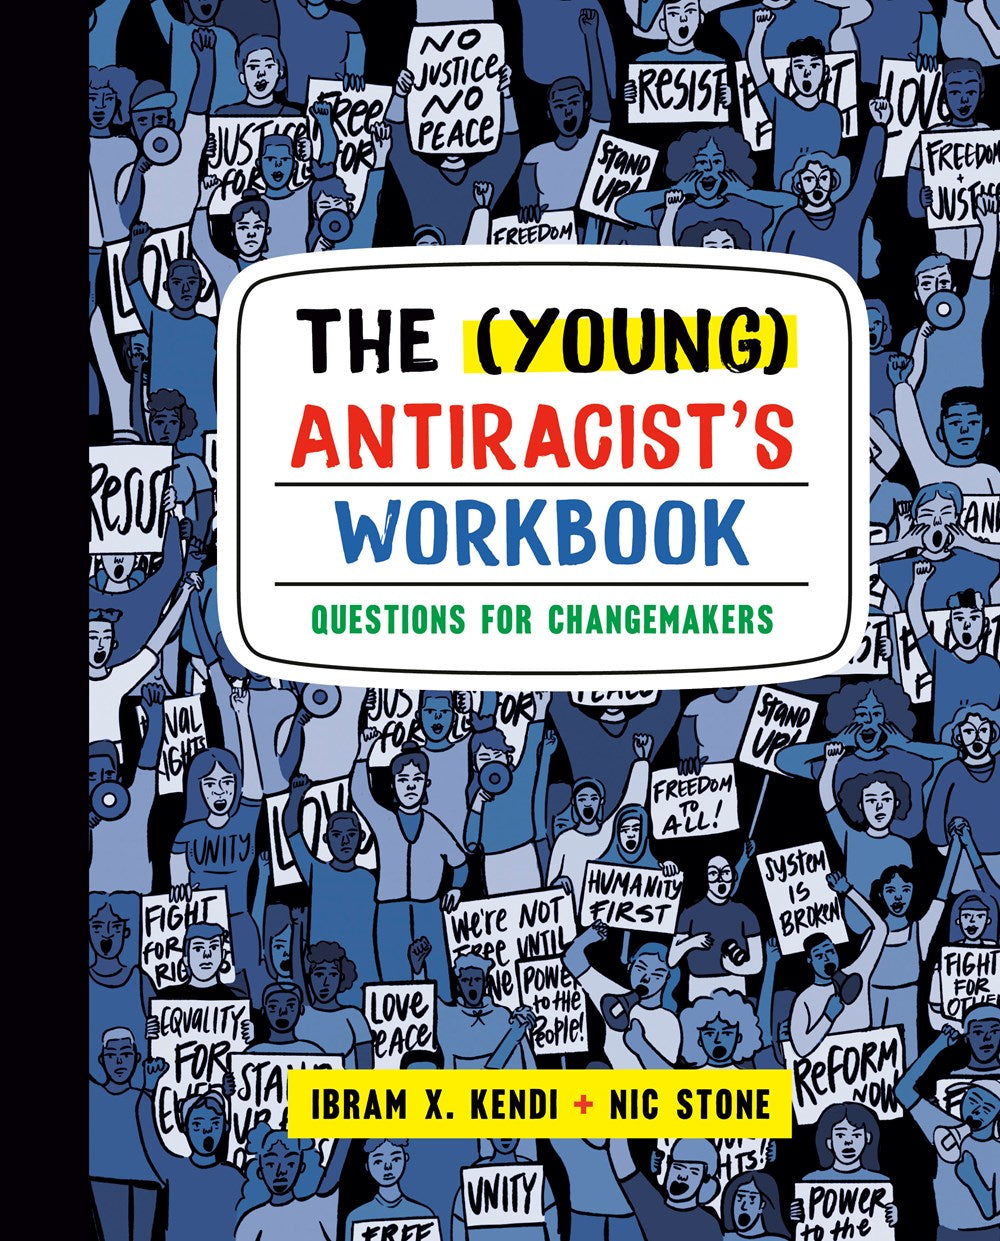 The (Young) Antiracist's Workbook: Questions for Changemakers by Ibram X. Kendi